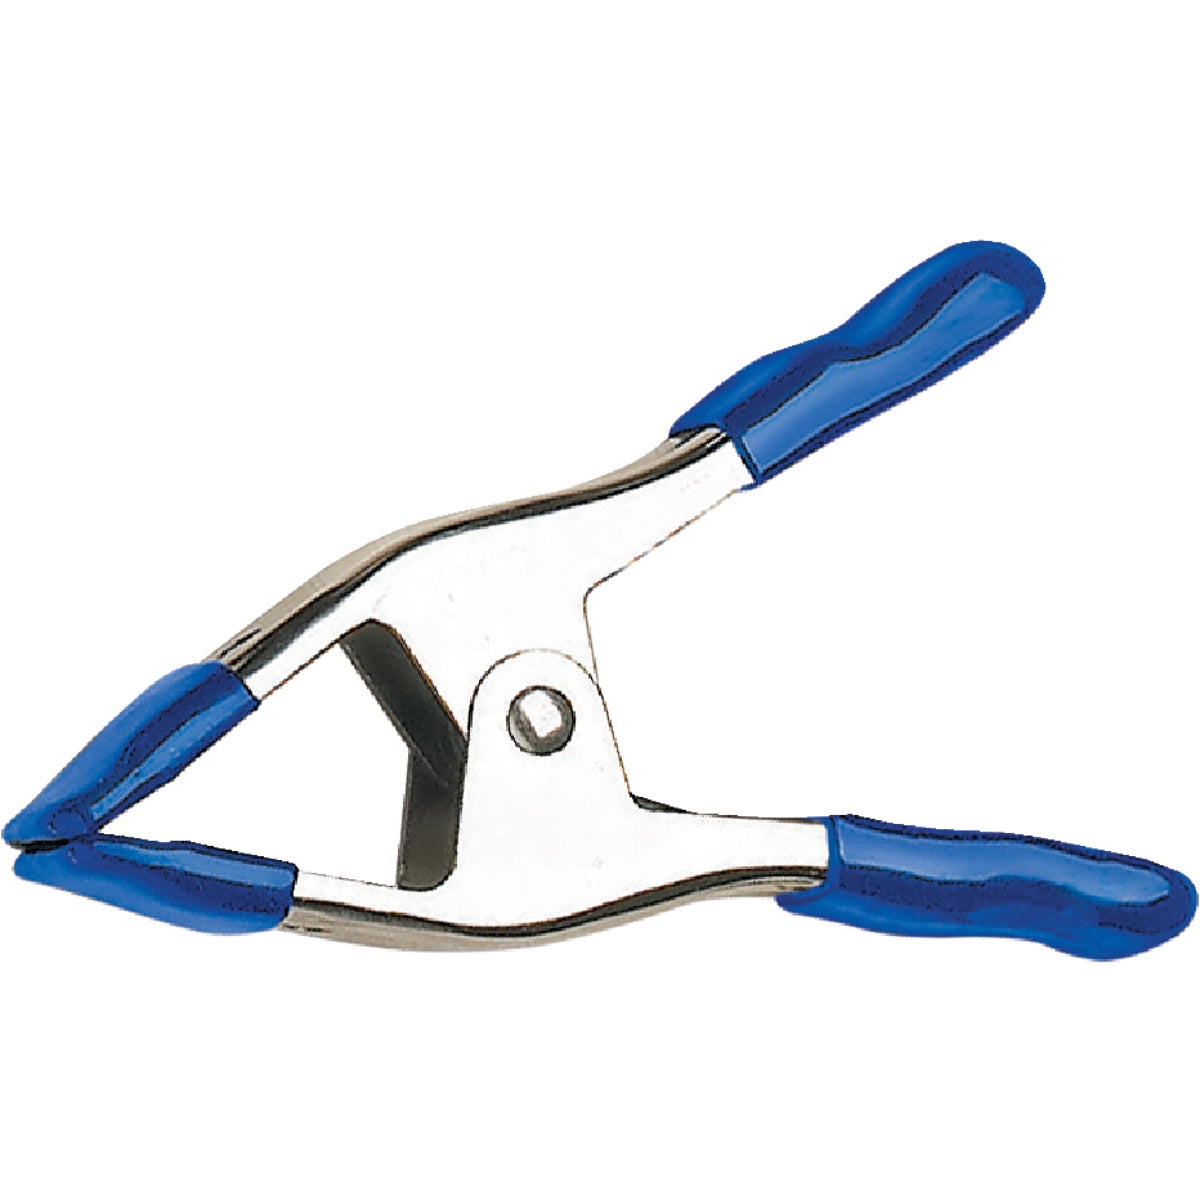 Item 326659, Metal spring clamps include soft-grip pads for easy gripping and comfort 